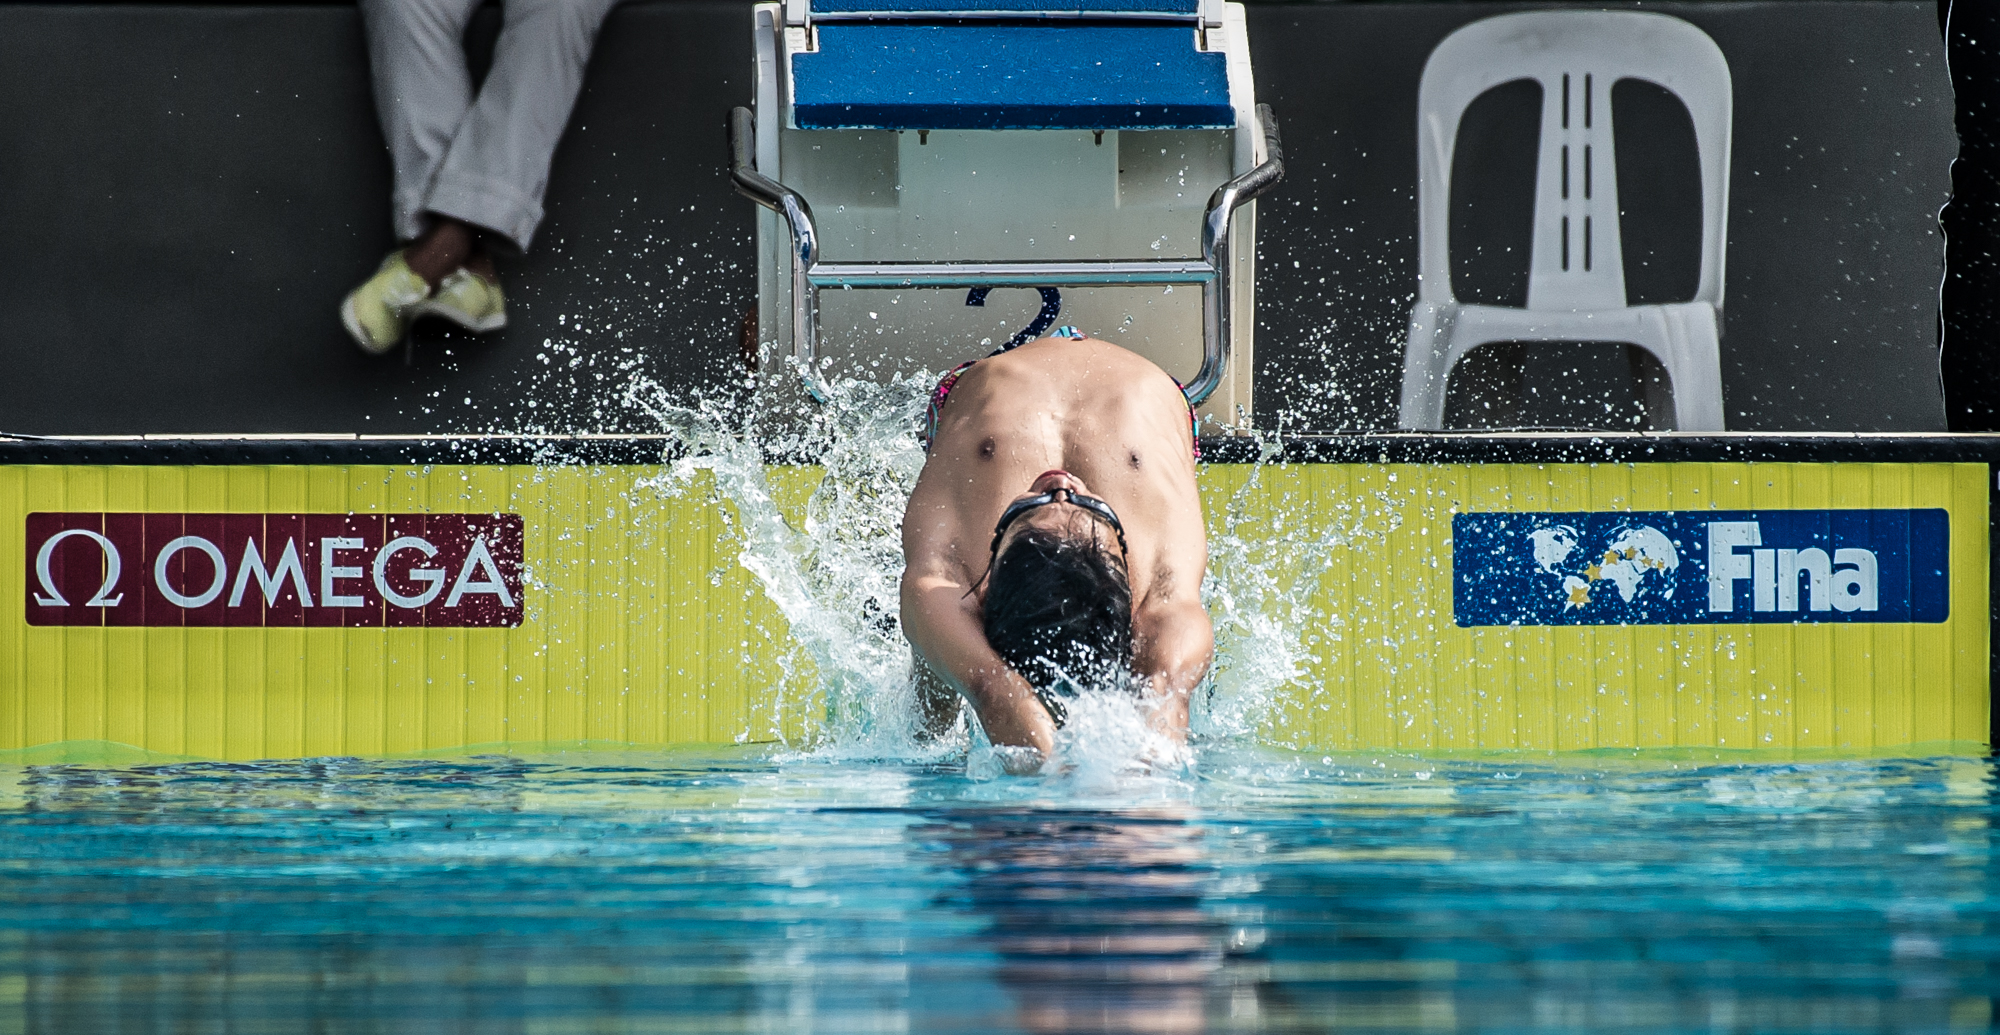 A Singaporean swimmer in action during the swimming competition of the Singapore National Games at the Toa Payoh Swimming Complex.